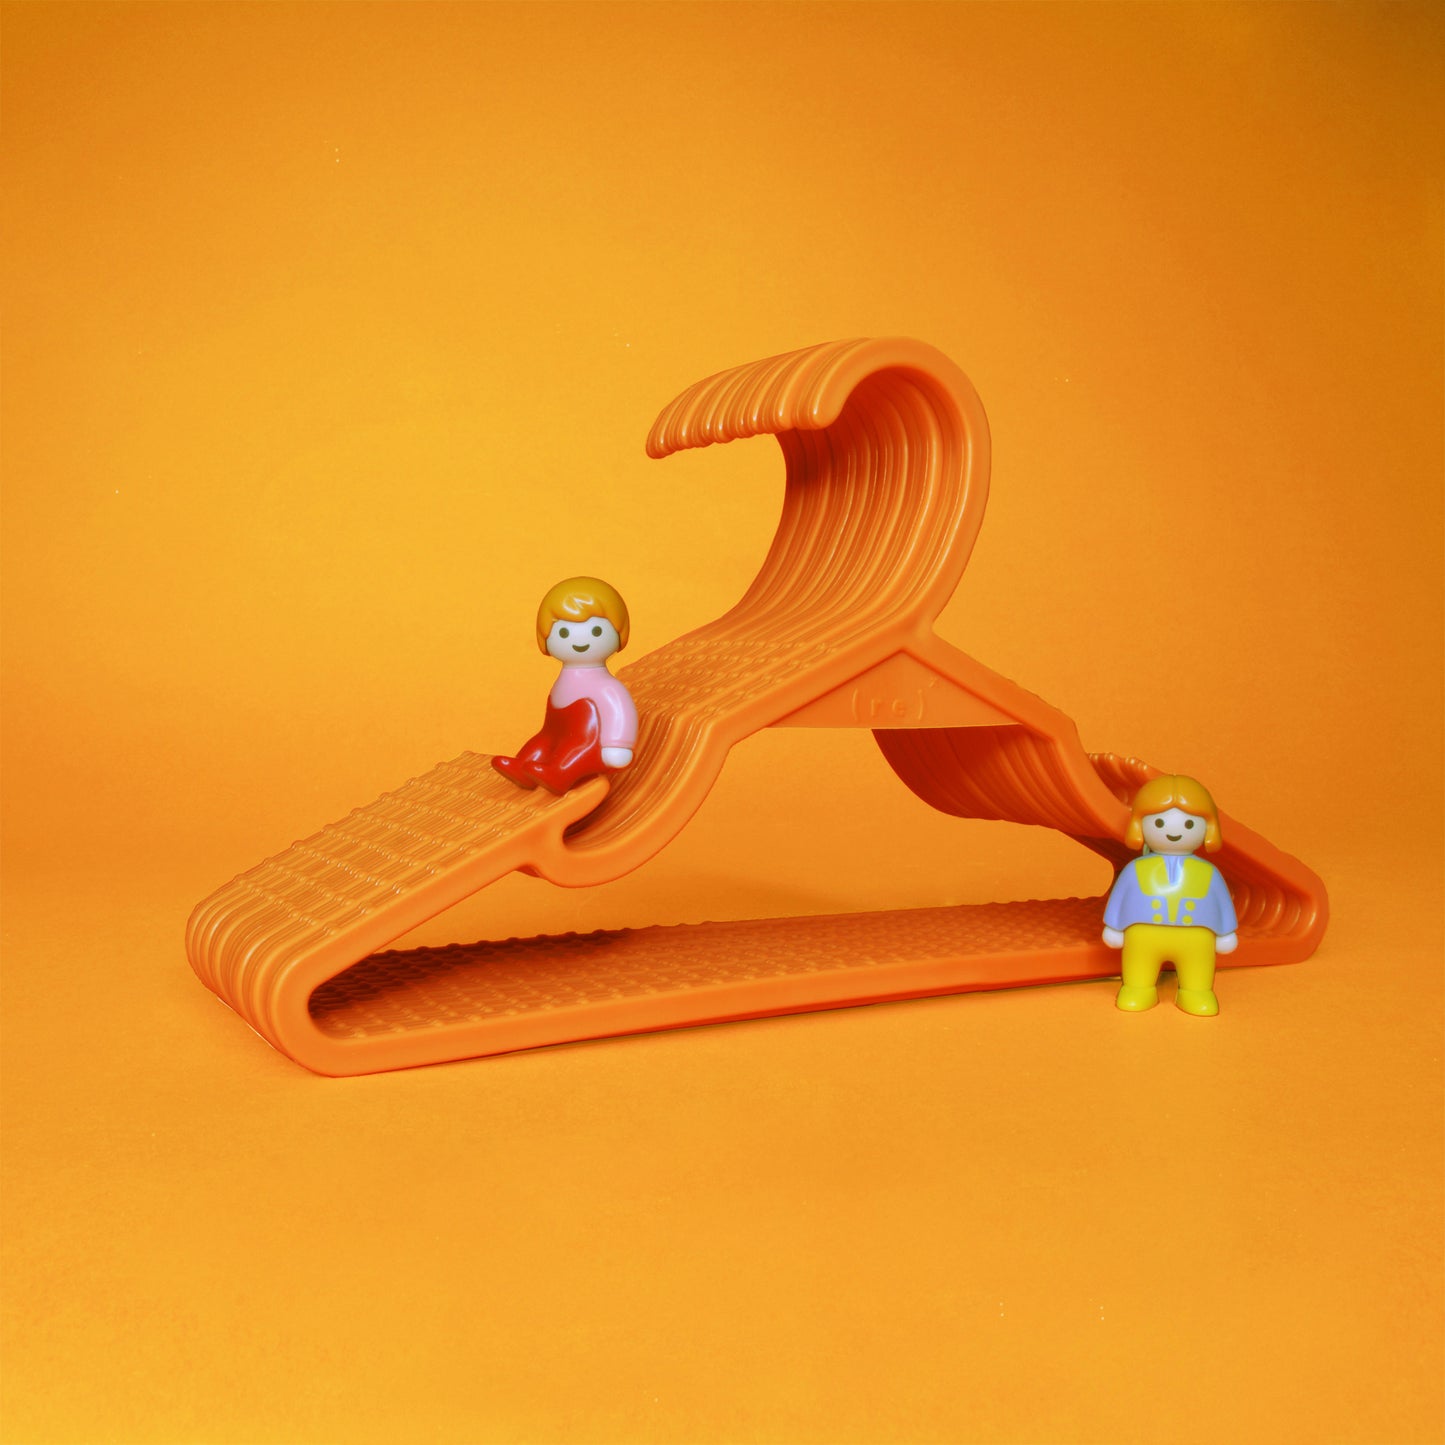 A set of orange kids hangers and two little toy figurines perched on the set